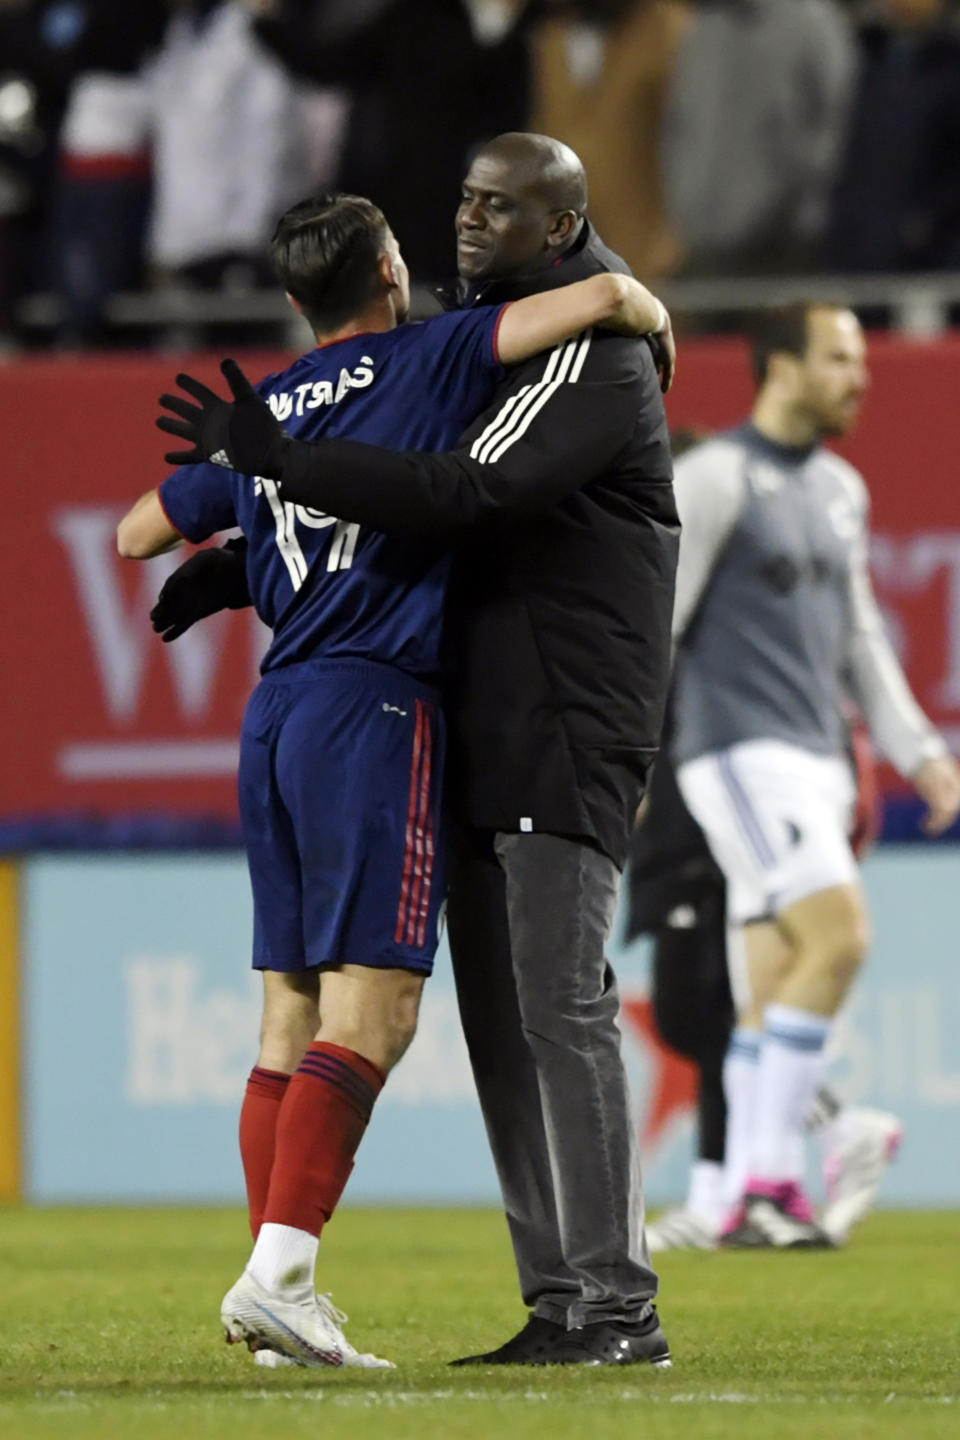 Chicago Fire head coach Ezra Hendrickson right, hugs George Koutsias (19) after defeating Minnesota United 2-1 in an MLS soccer game Saturday, April 8, 2023 in Chicago. This was Koutsias' first MLS game after being called up from Greece. (AP Photo/Paul Beaty)